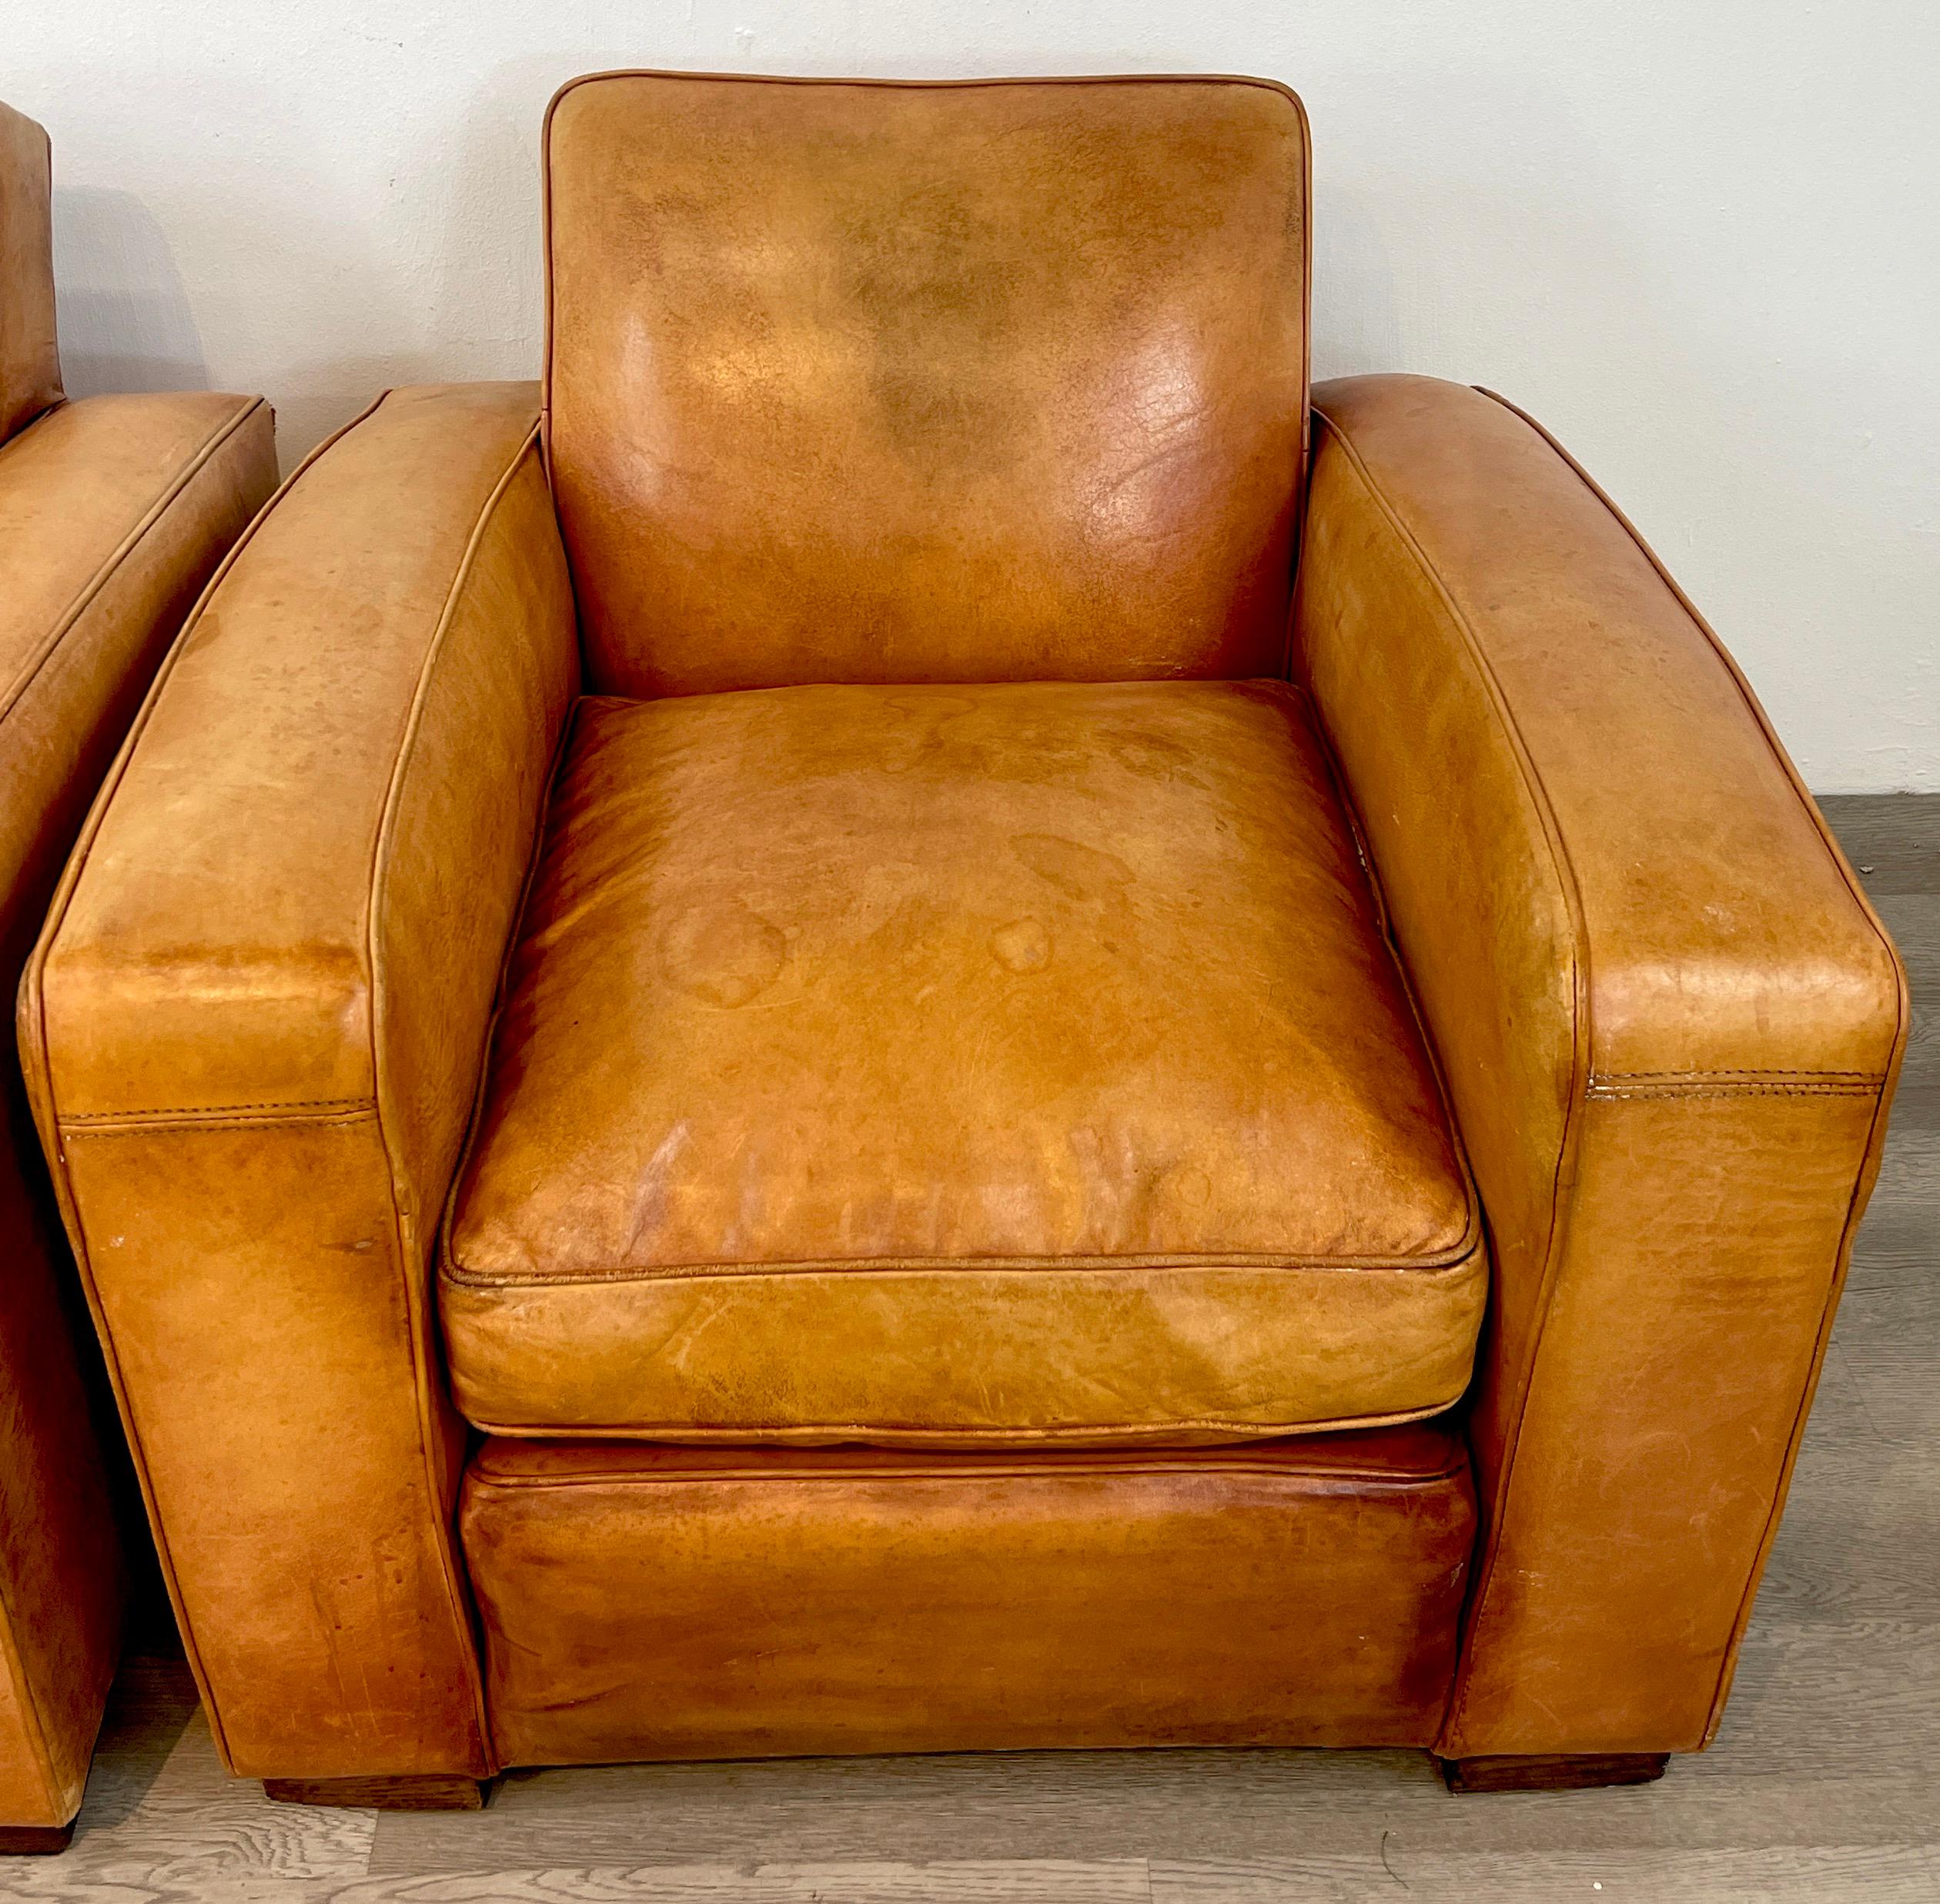 20th Century Pair of French Art Deco Leather Club Chairs